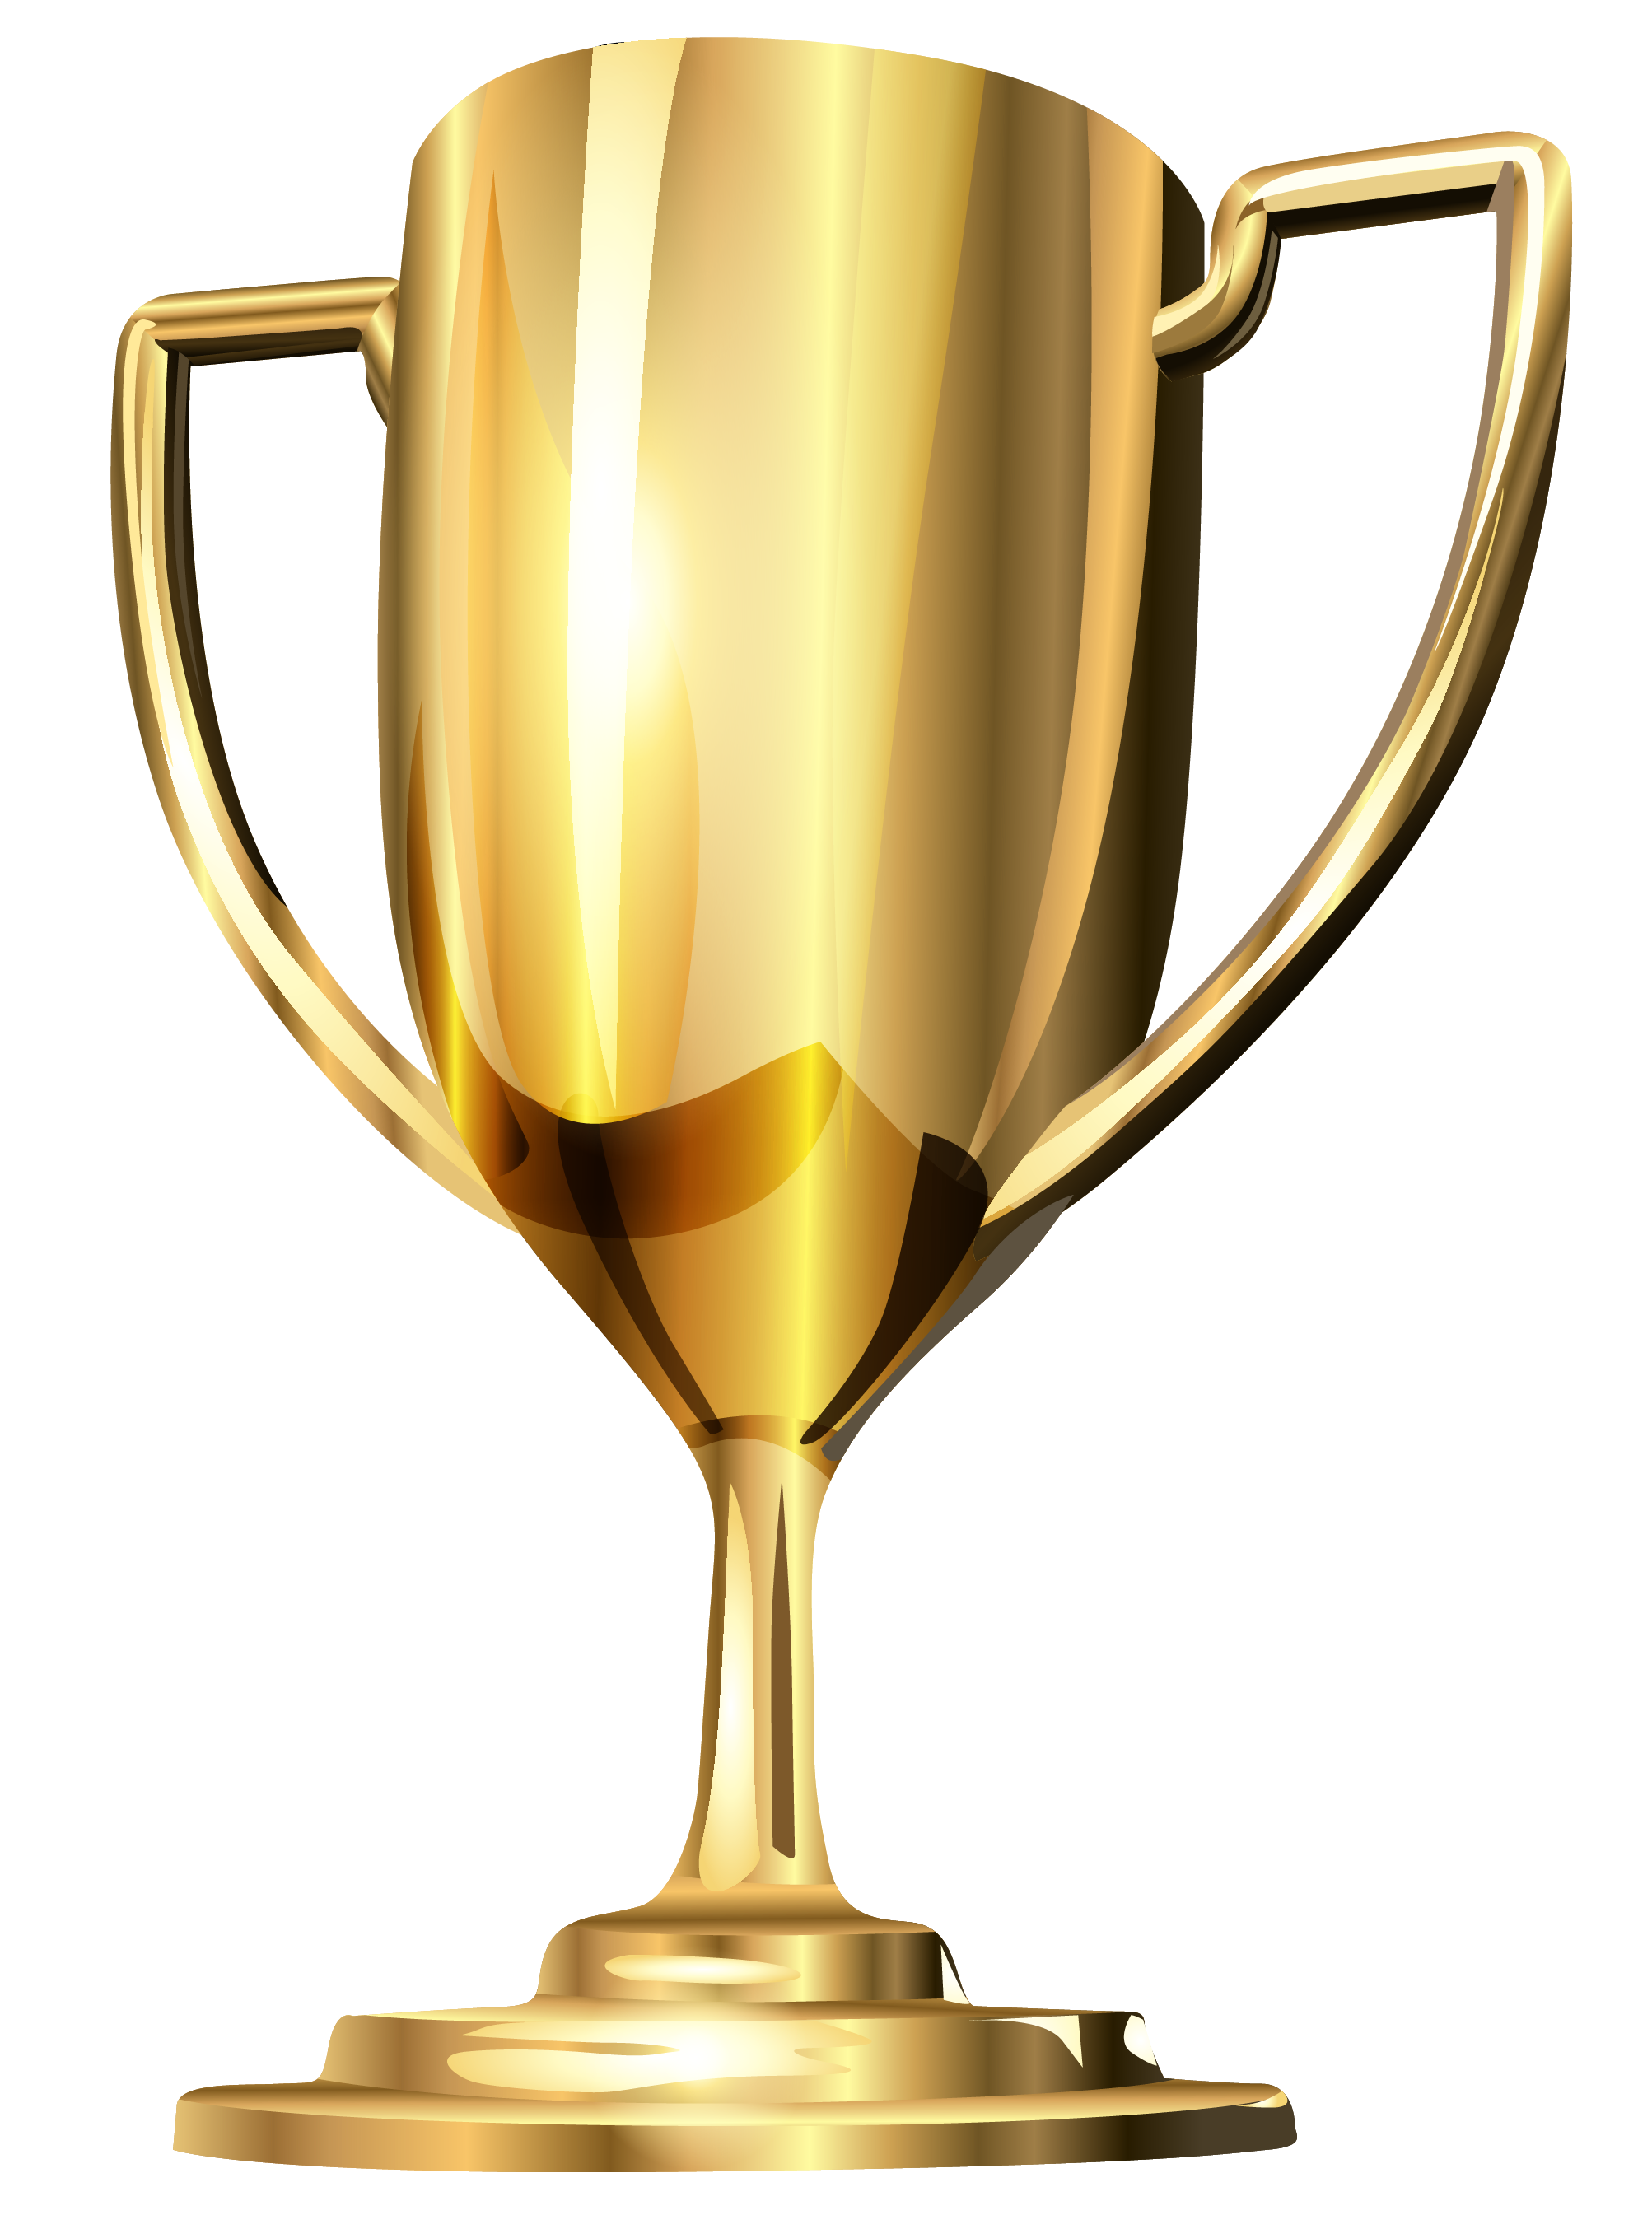 trophy gold clipart free - Trophy Clipart Free